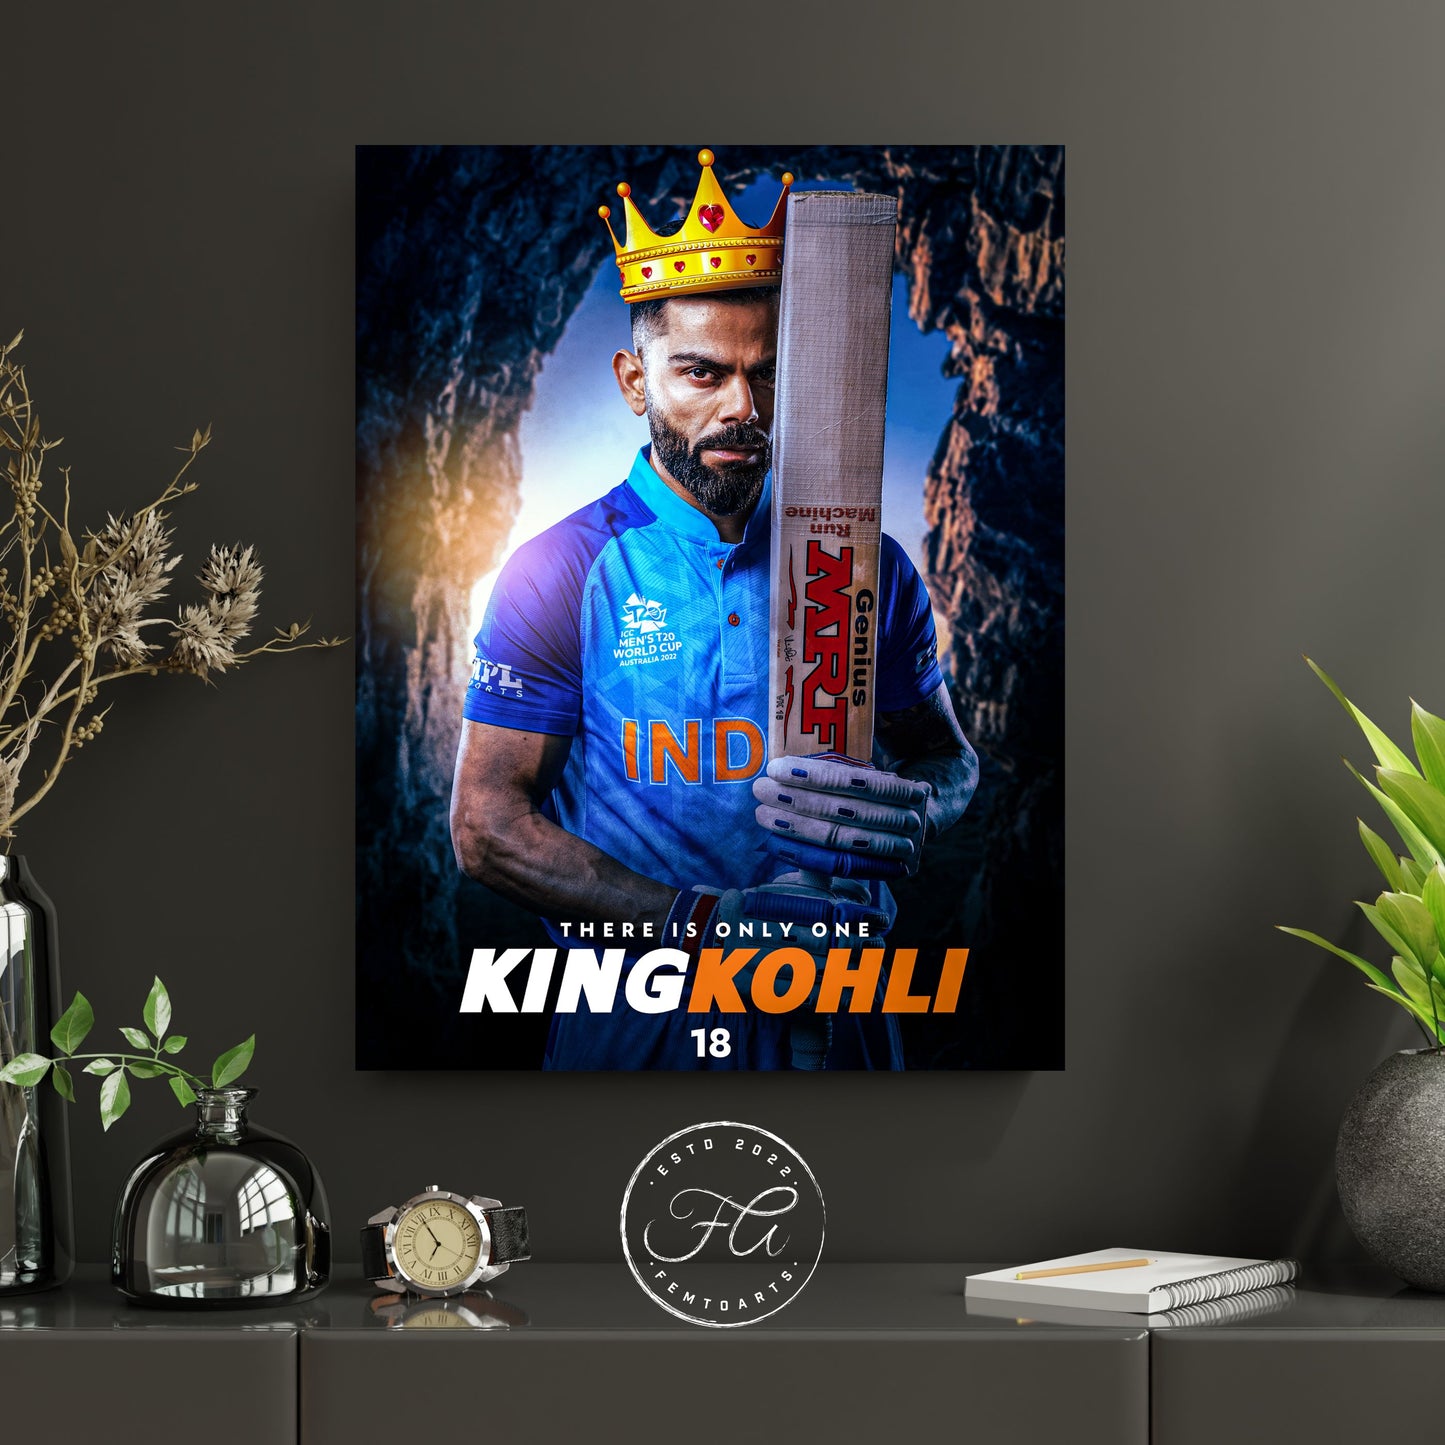 There is only one King Kohli